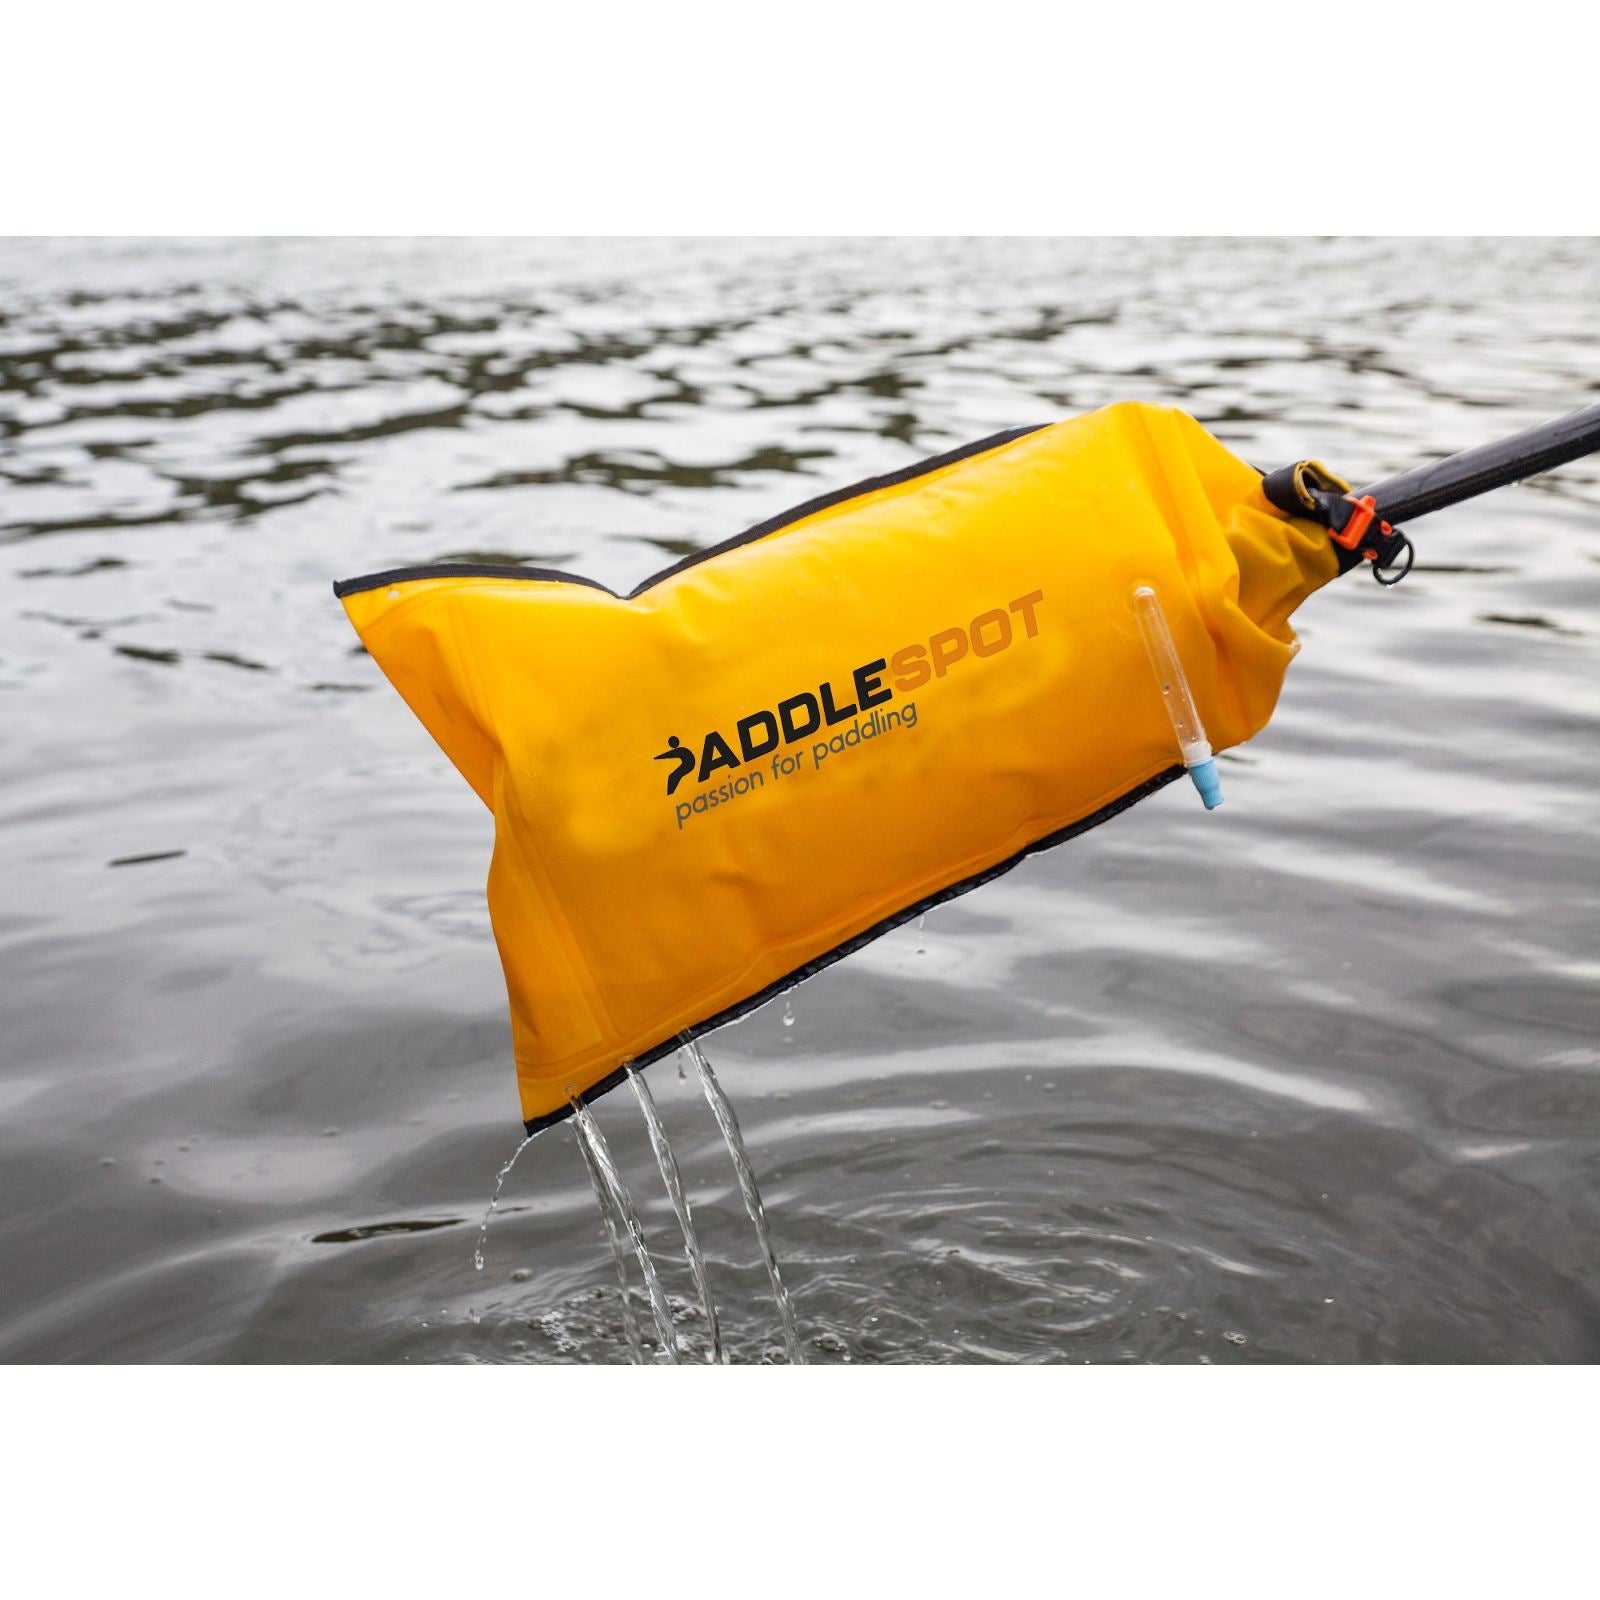 Paddlespot Inflatable Paddle Float